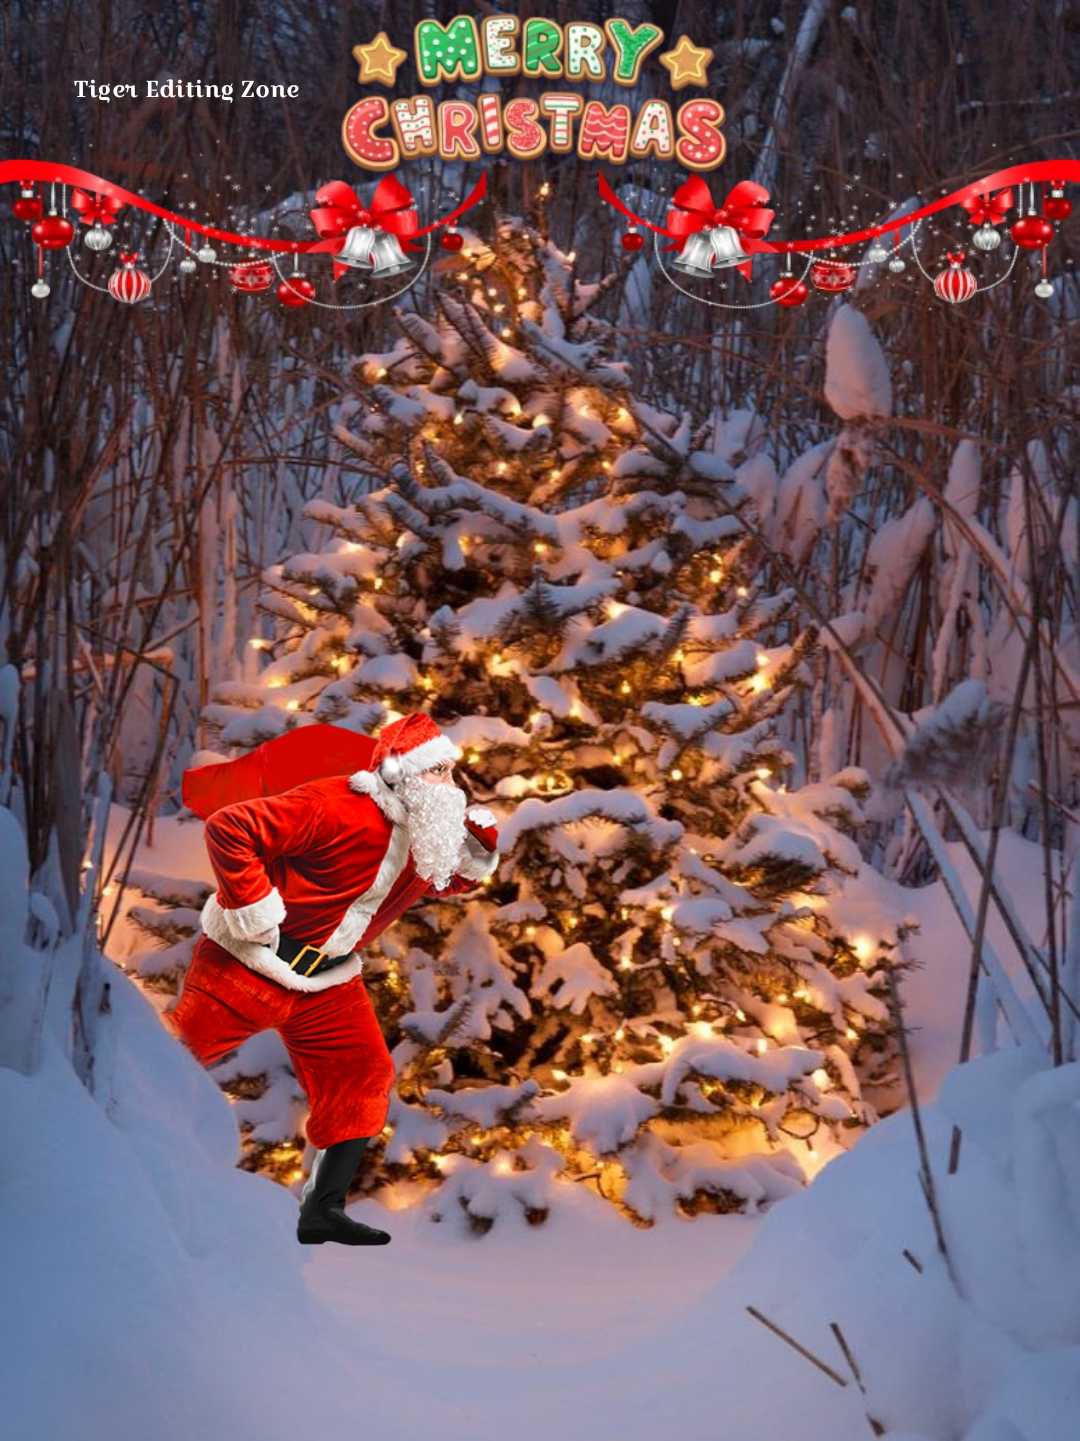 Free Christmas Editing Backgrounds